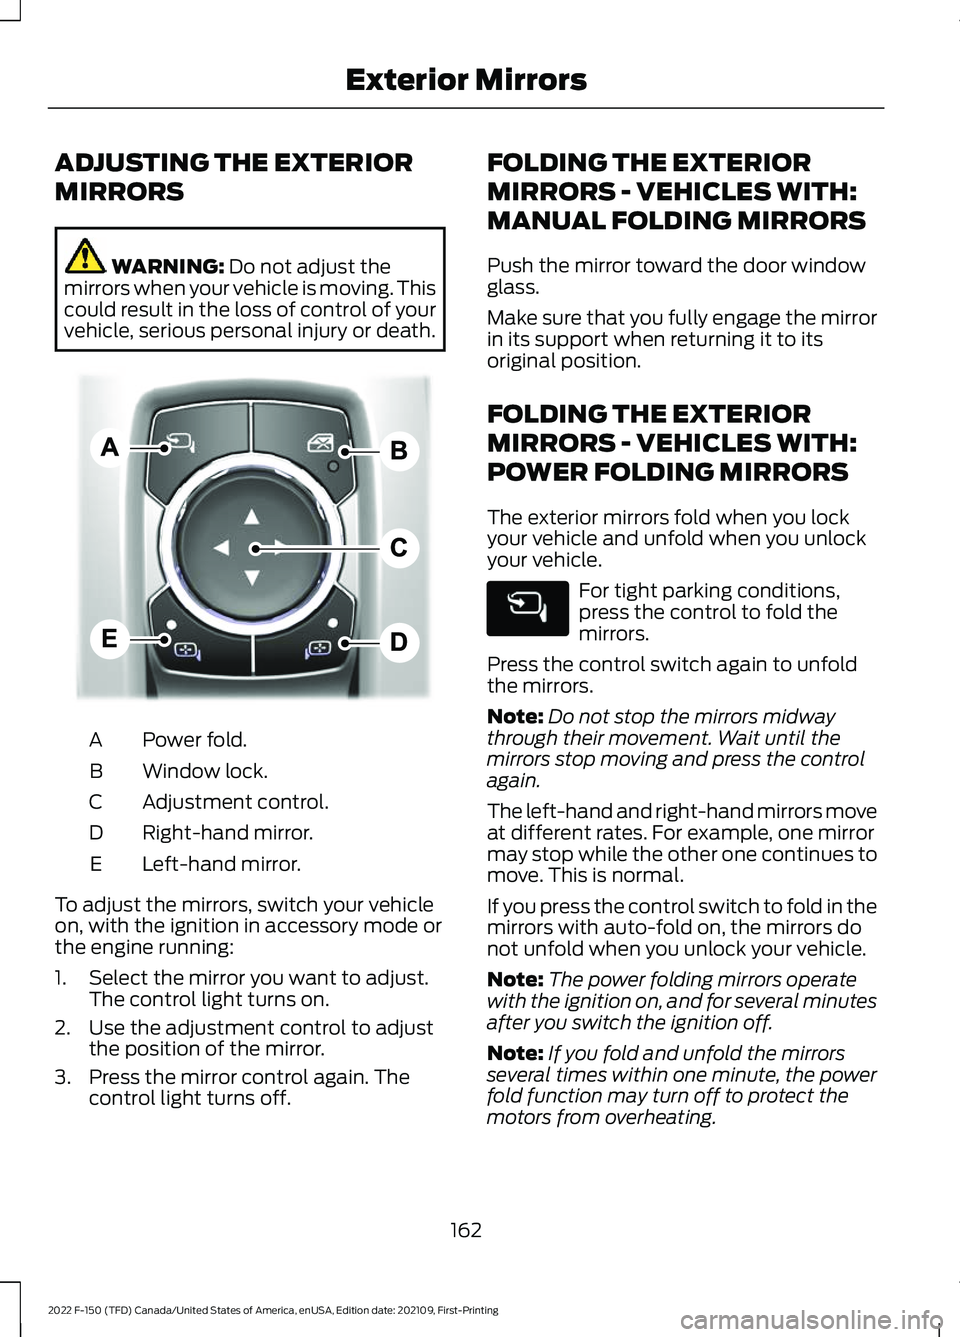 FORD F-150 2022  Owners Manual ADJUSTING THE EXTERIOR
MIRRORS
WARNING: Do not adjust the
mirrors when your vehicle is moving. This
could result in the loss of control of your
vehicle, serious personal injury or death. Power fold.
A